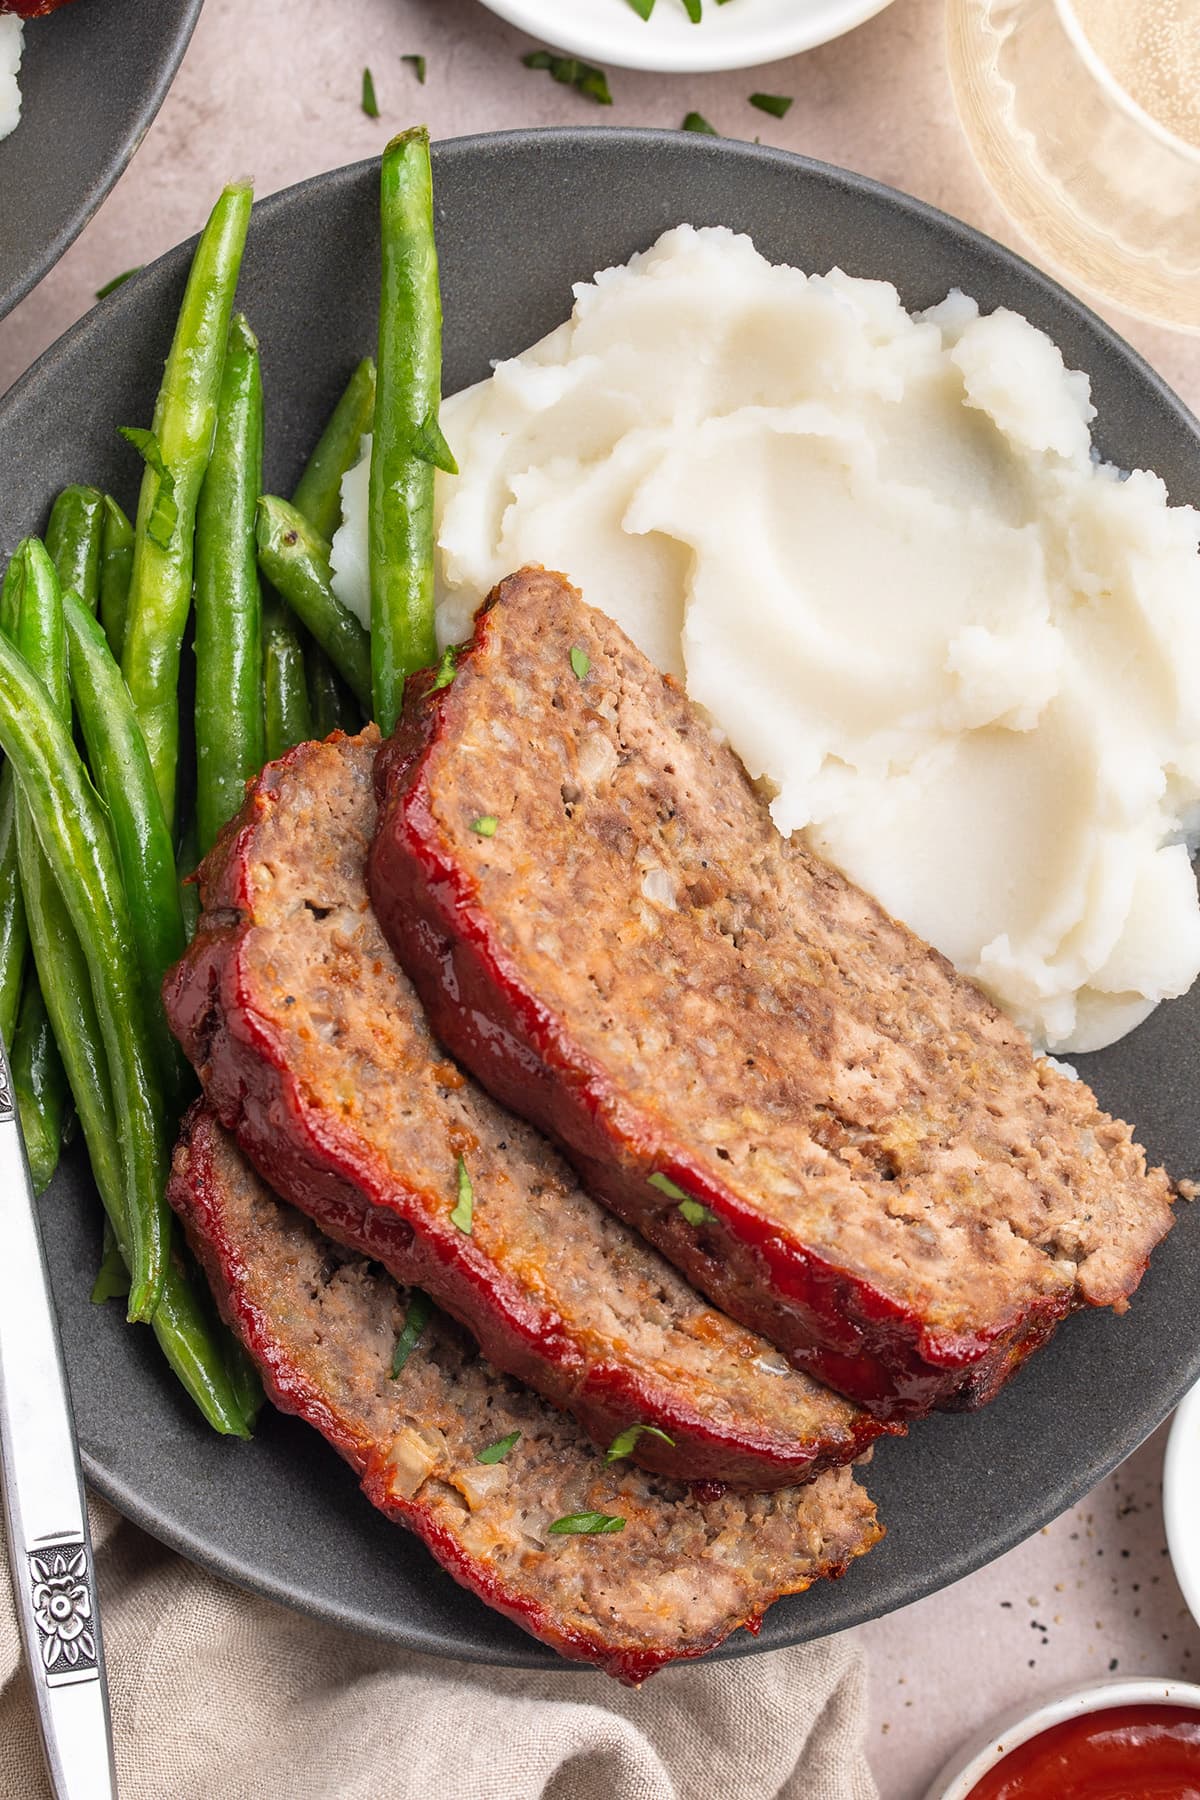 Three slices of gluten-free meatloaf topped with ketchup and plated with mashed potatoes and fresh green beans.